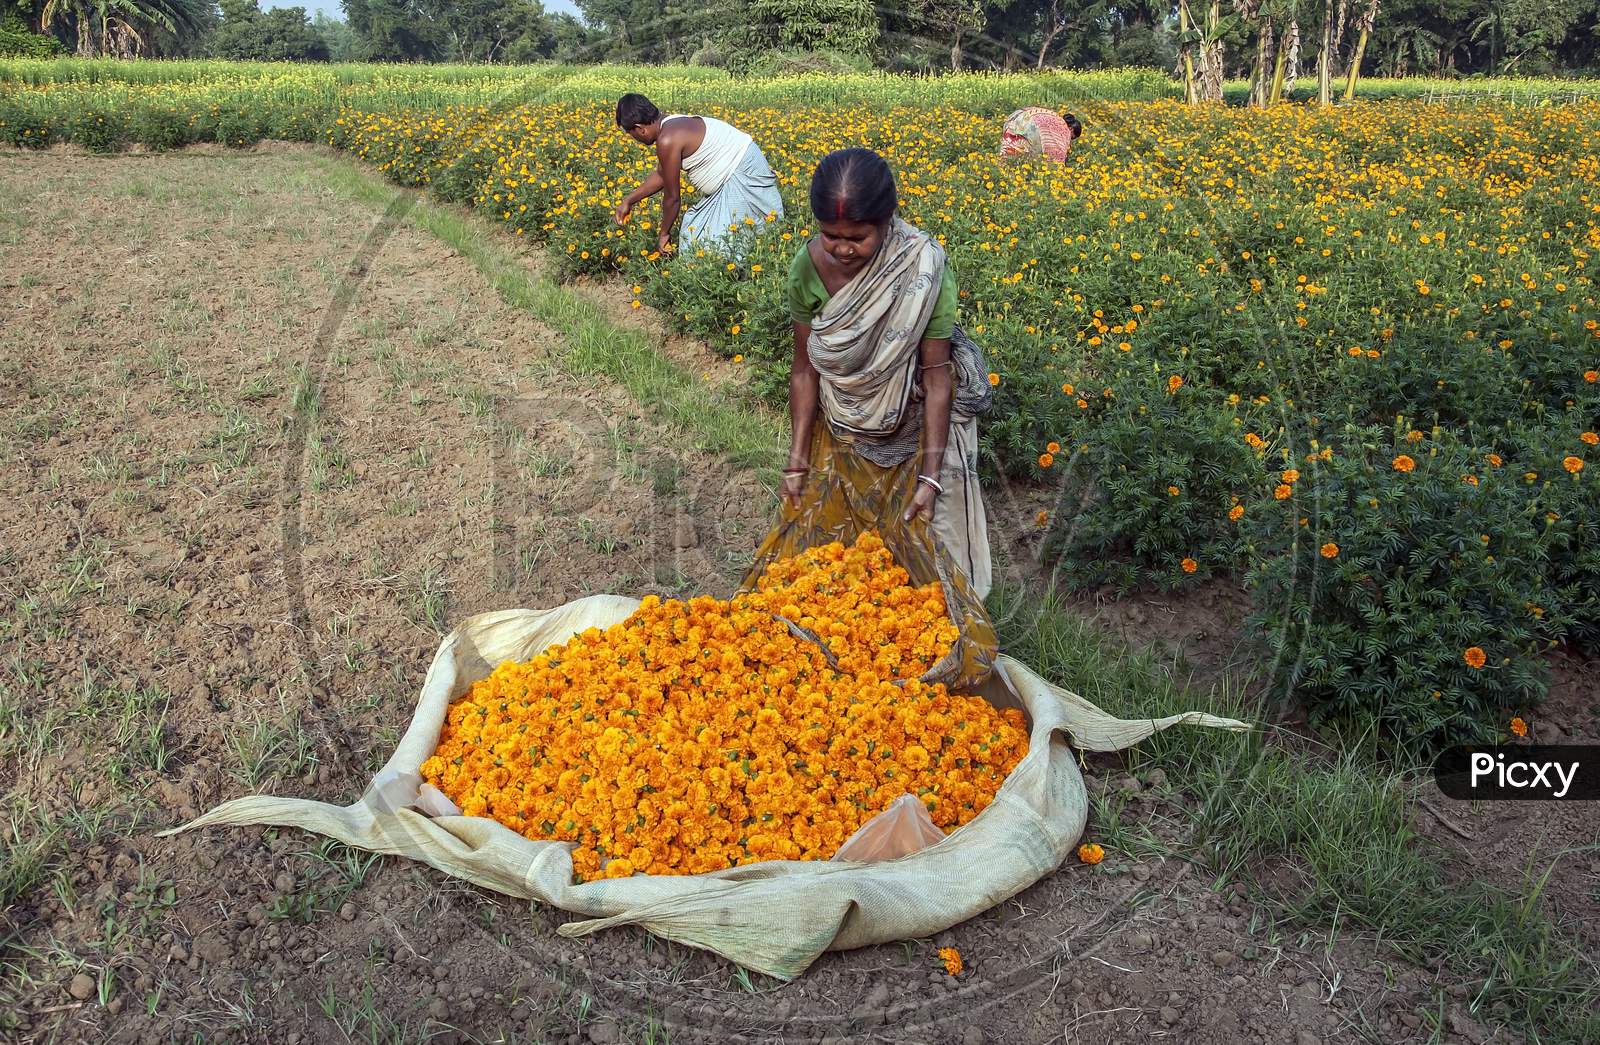 The woman is gathering marigold flowers.